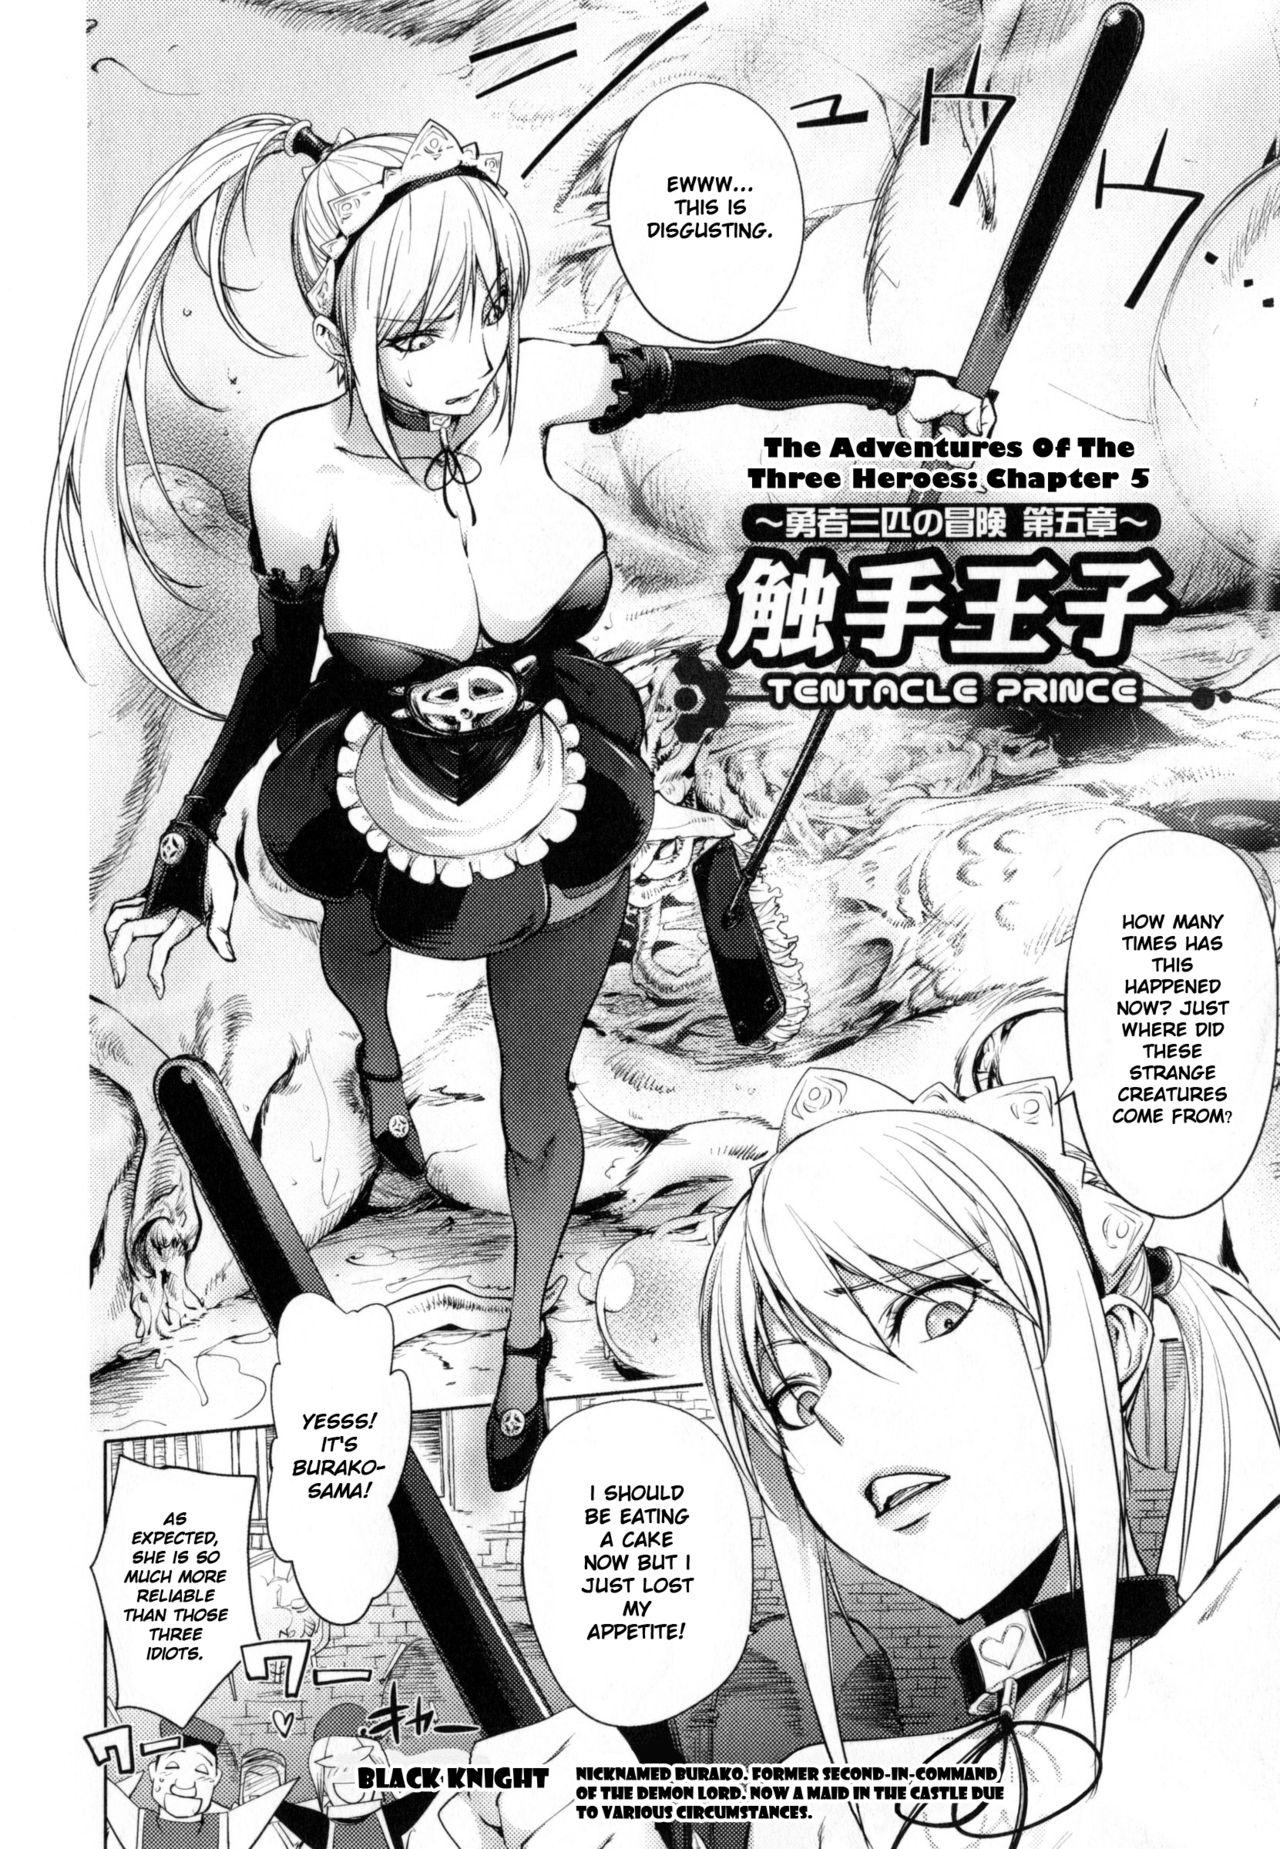 Screaming Shokushu Ouji | The Adventures Of The Three Heroes: Chapter 5 - The Tentacle Prince Colombian - Picture 2